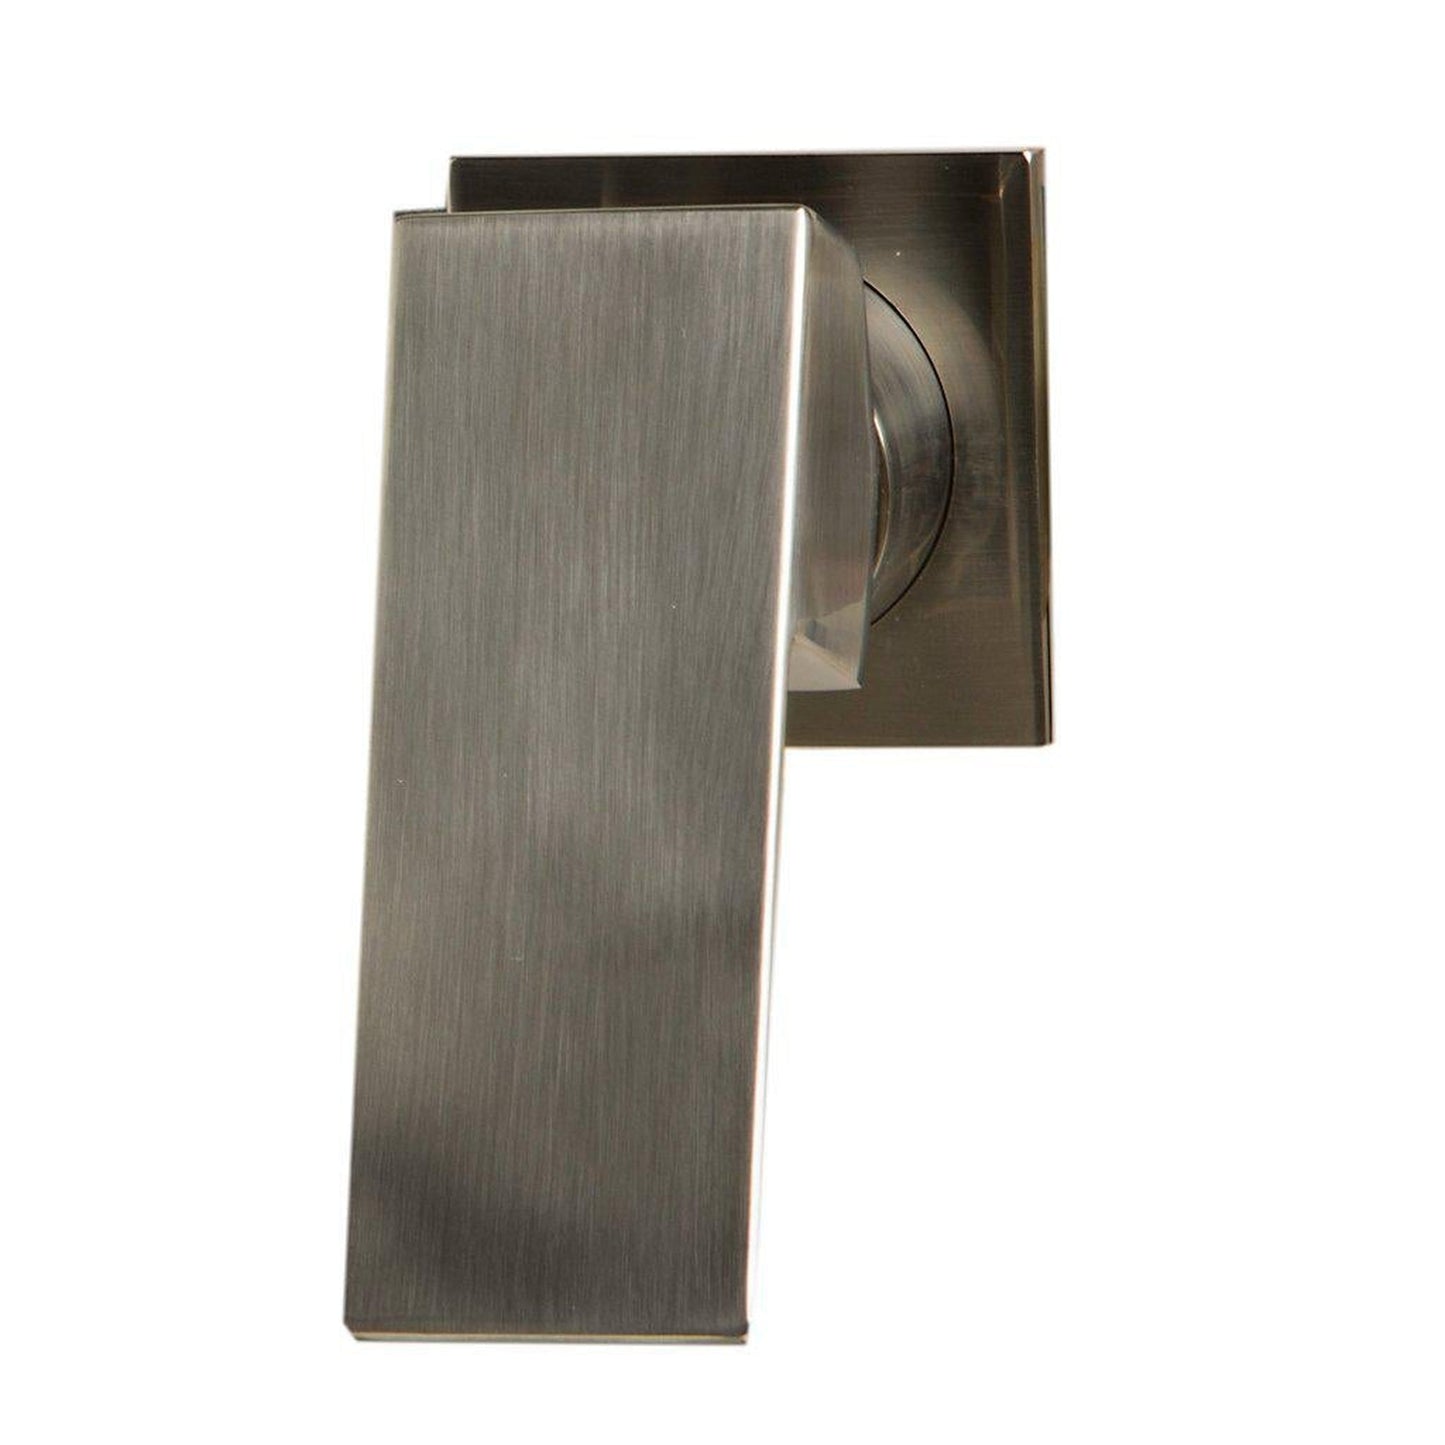 ALFI Brand AB1468-BN Brushed Nickel Wall-Mounted Square Spout Brass Bathroom Sink Faucet With Single Lever